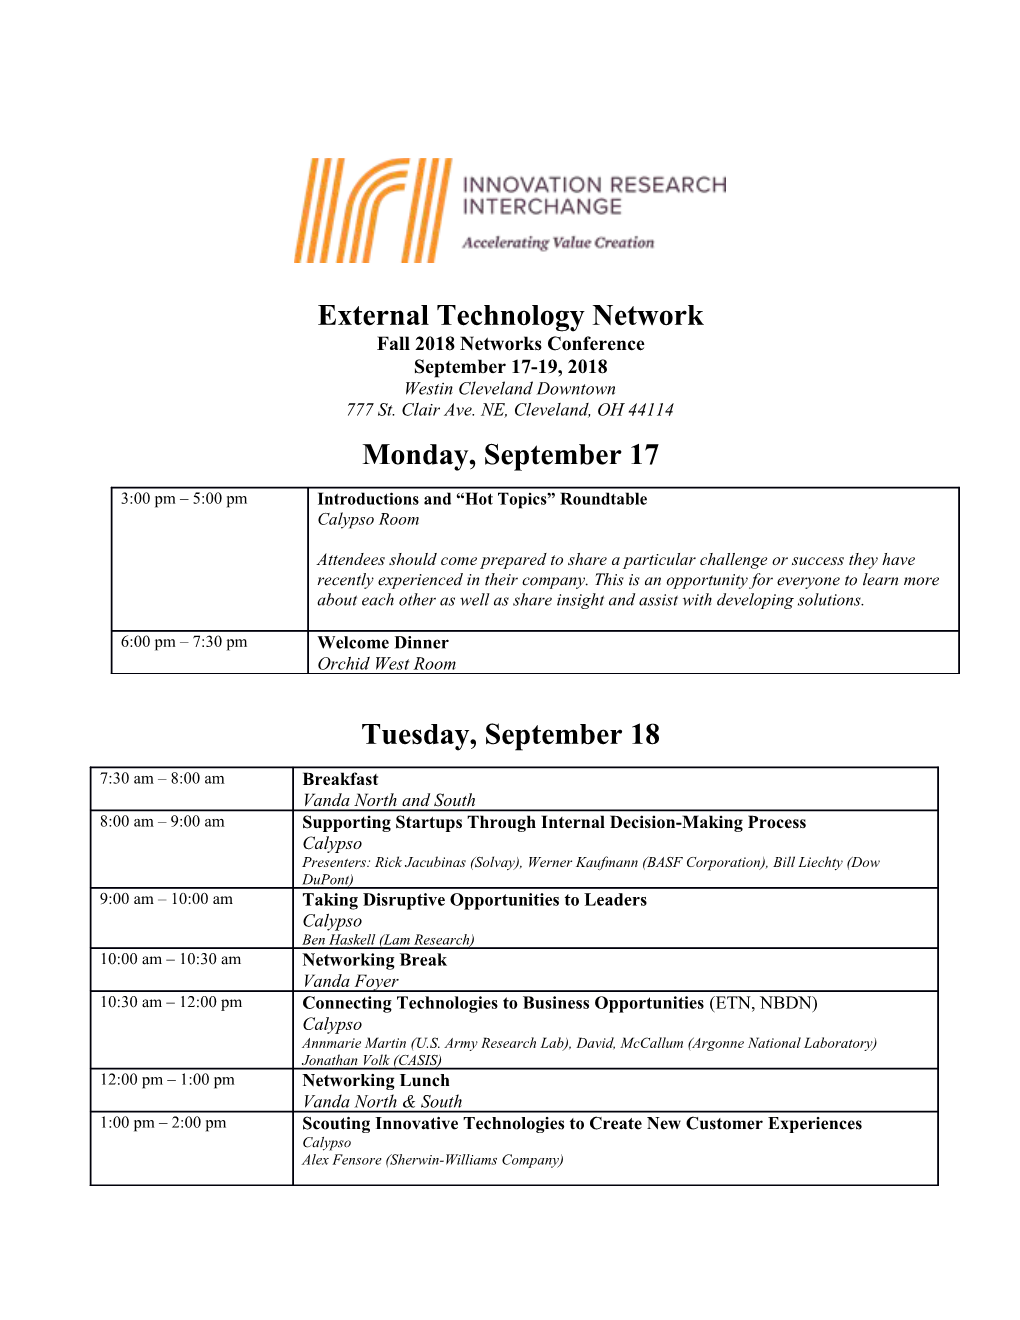 External Technology Network Fall 2018 Networks Conference September 17-19, 2018 Westin